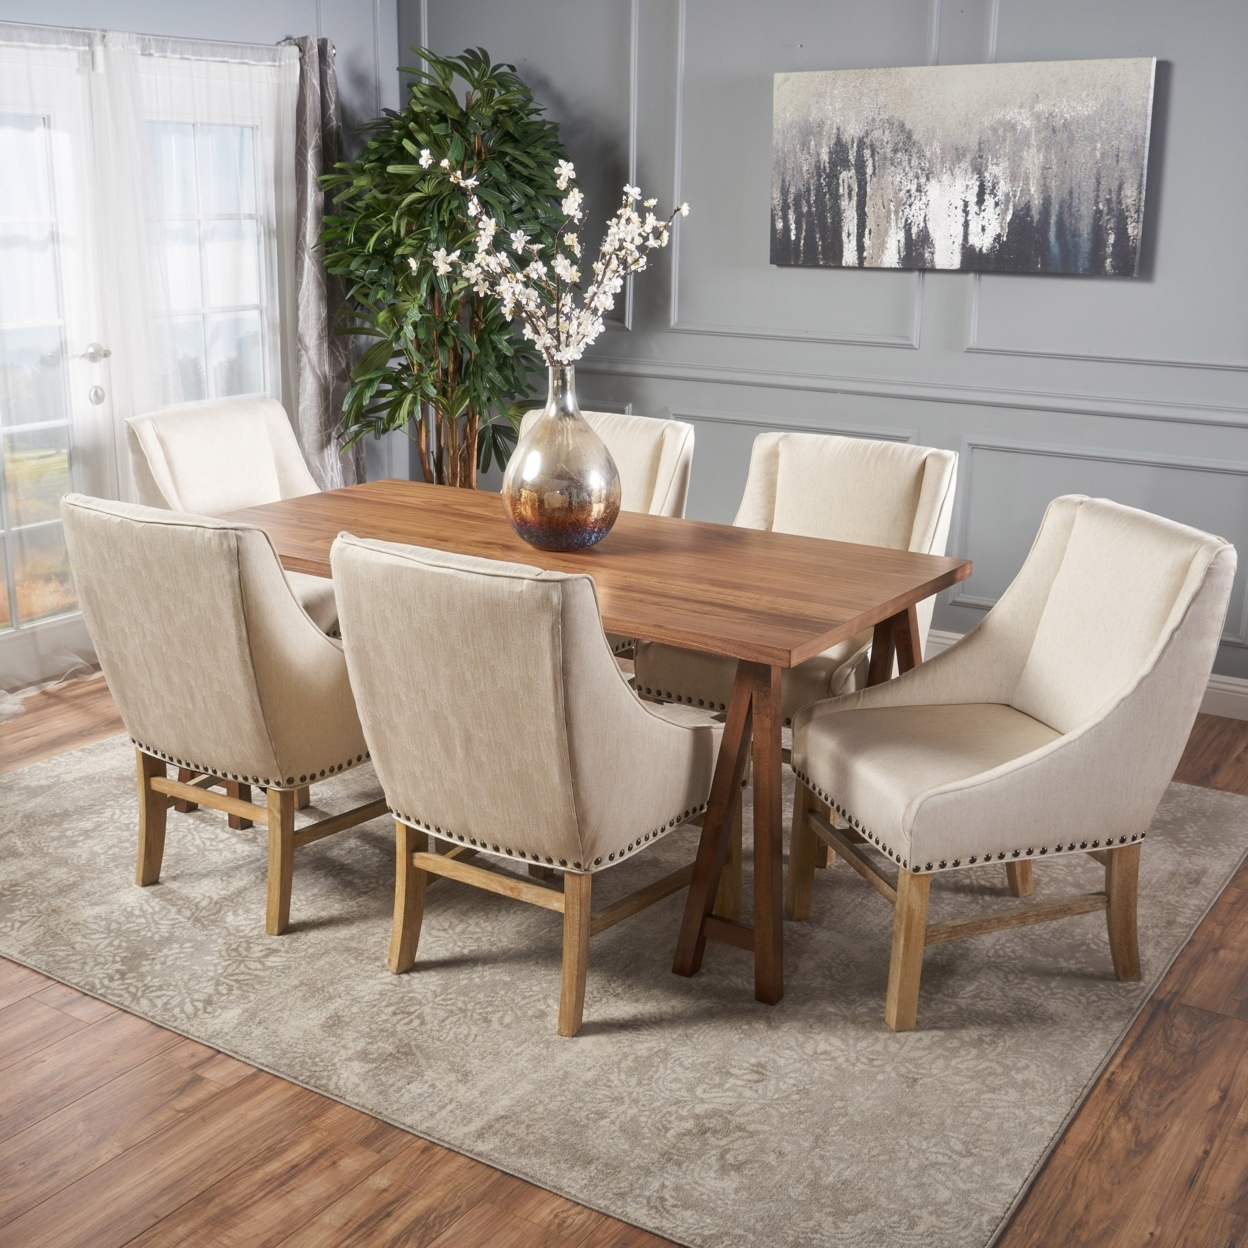 Sandor Farmhouse 7 Piece Dining Set With Fabric Dining Chairs - Silver